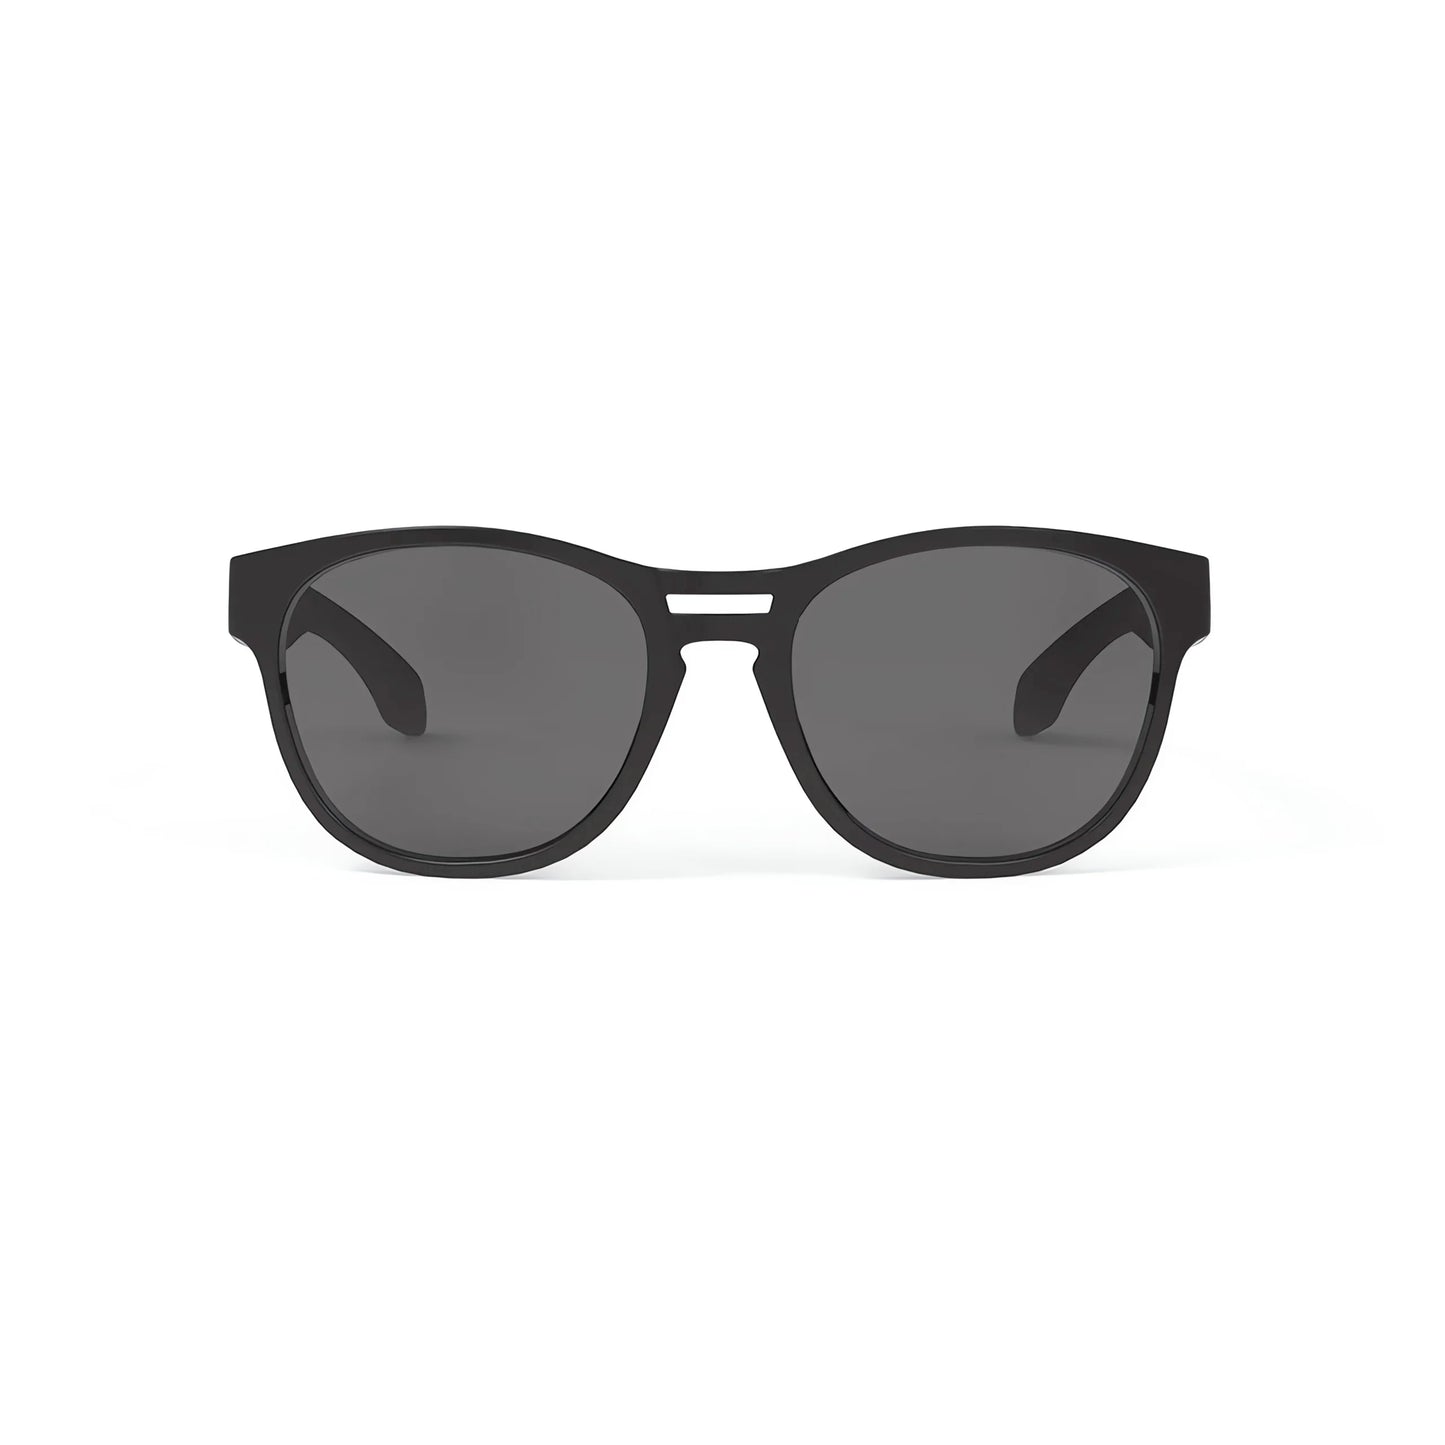 Rudy Project Spinair 56 Sunglasses | Size 54